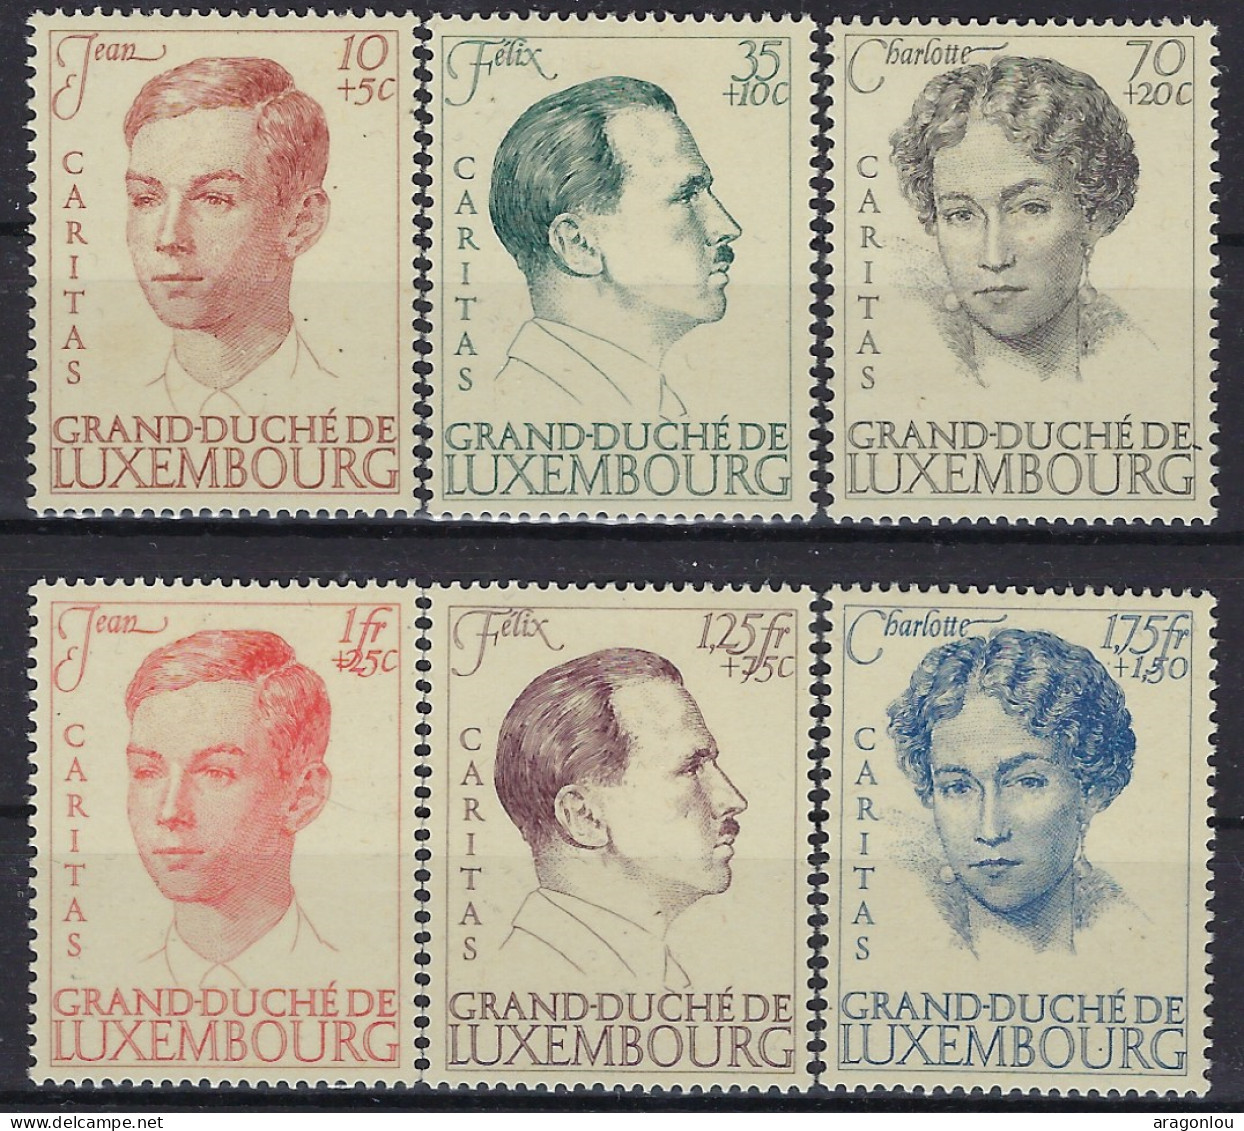 Luxembourg - Luxemburg - Timbres - Caritas  1939  Série  * - Gebraucht